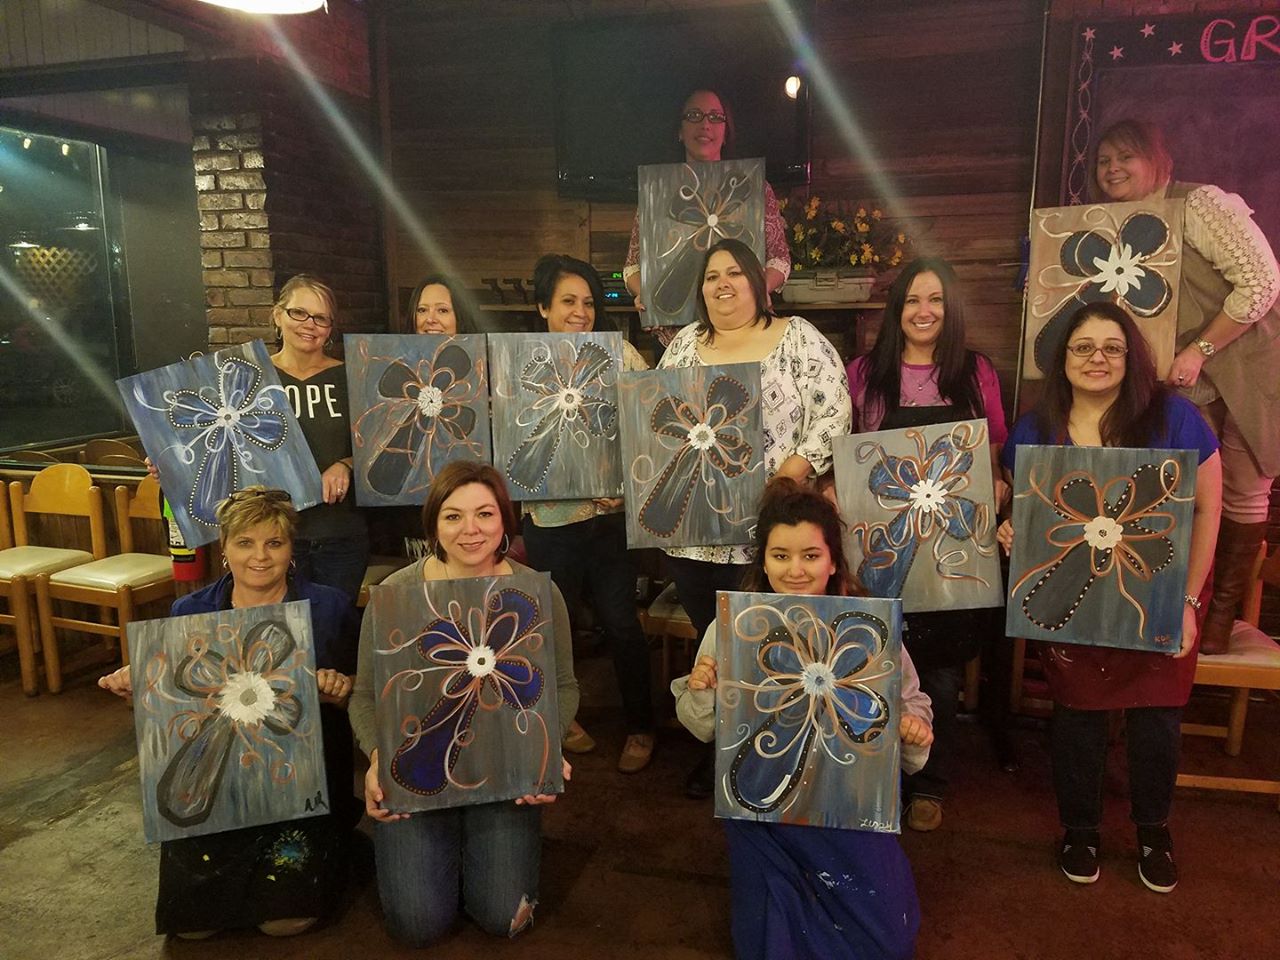 Crazy Canvas at Grumps Cleburne